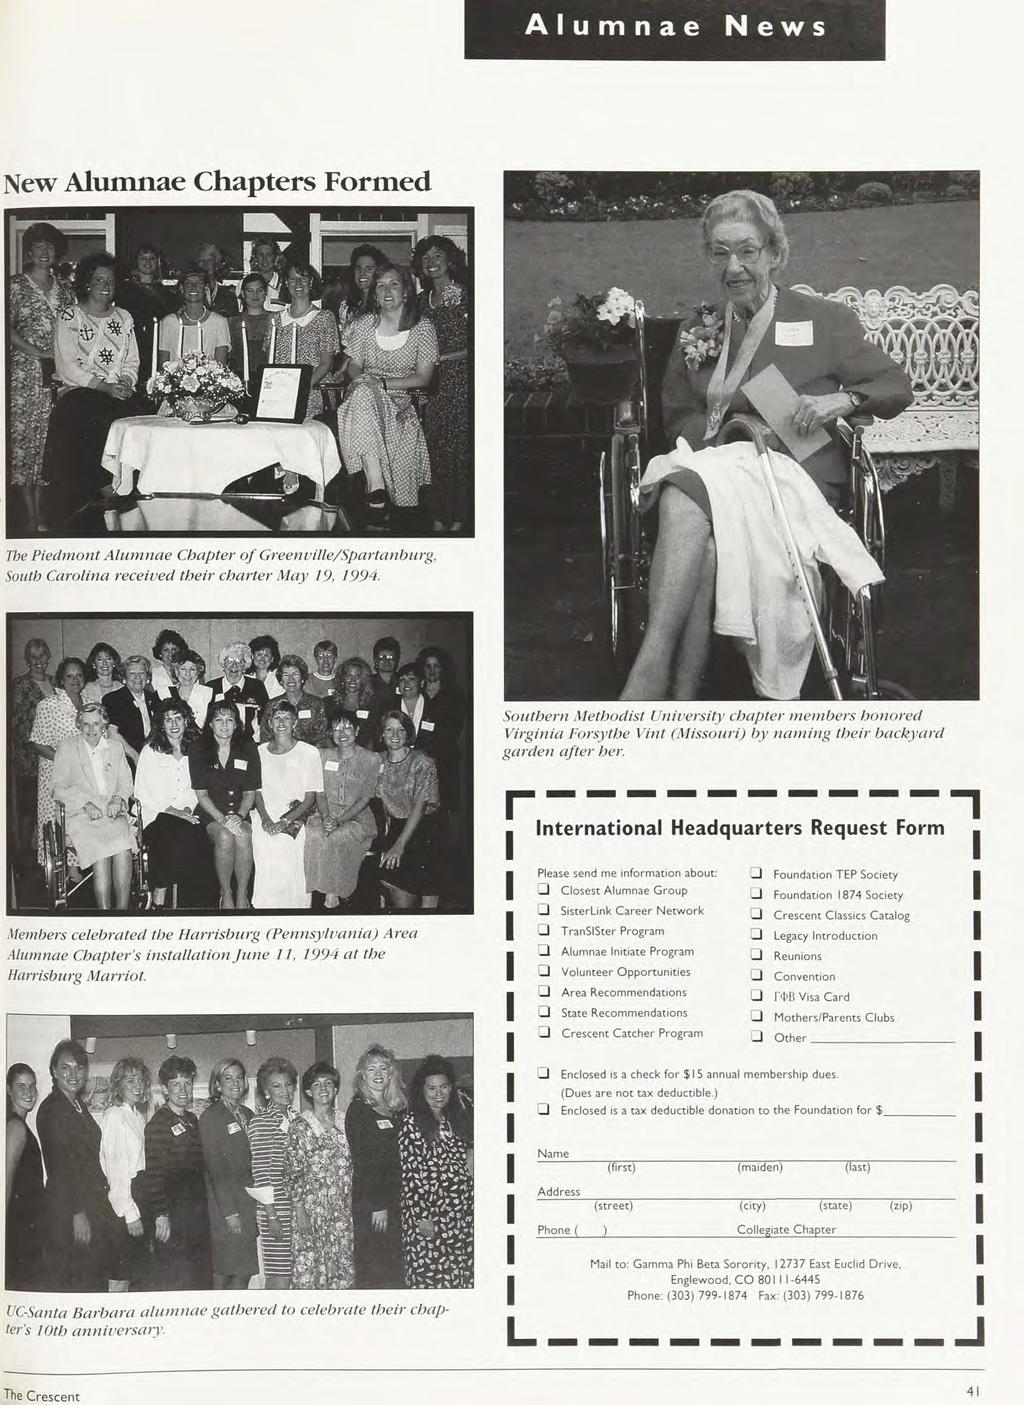 Alumnae News New Alumnae Chapters Formed The Piedmont Alumnae Chapter of Greenville/Spartanburg, South Carolina received their charter May 19, 1994.